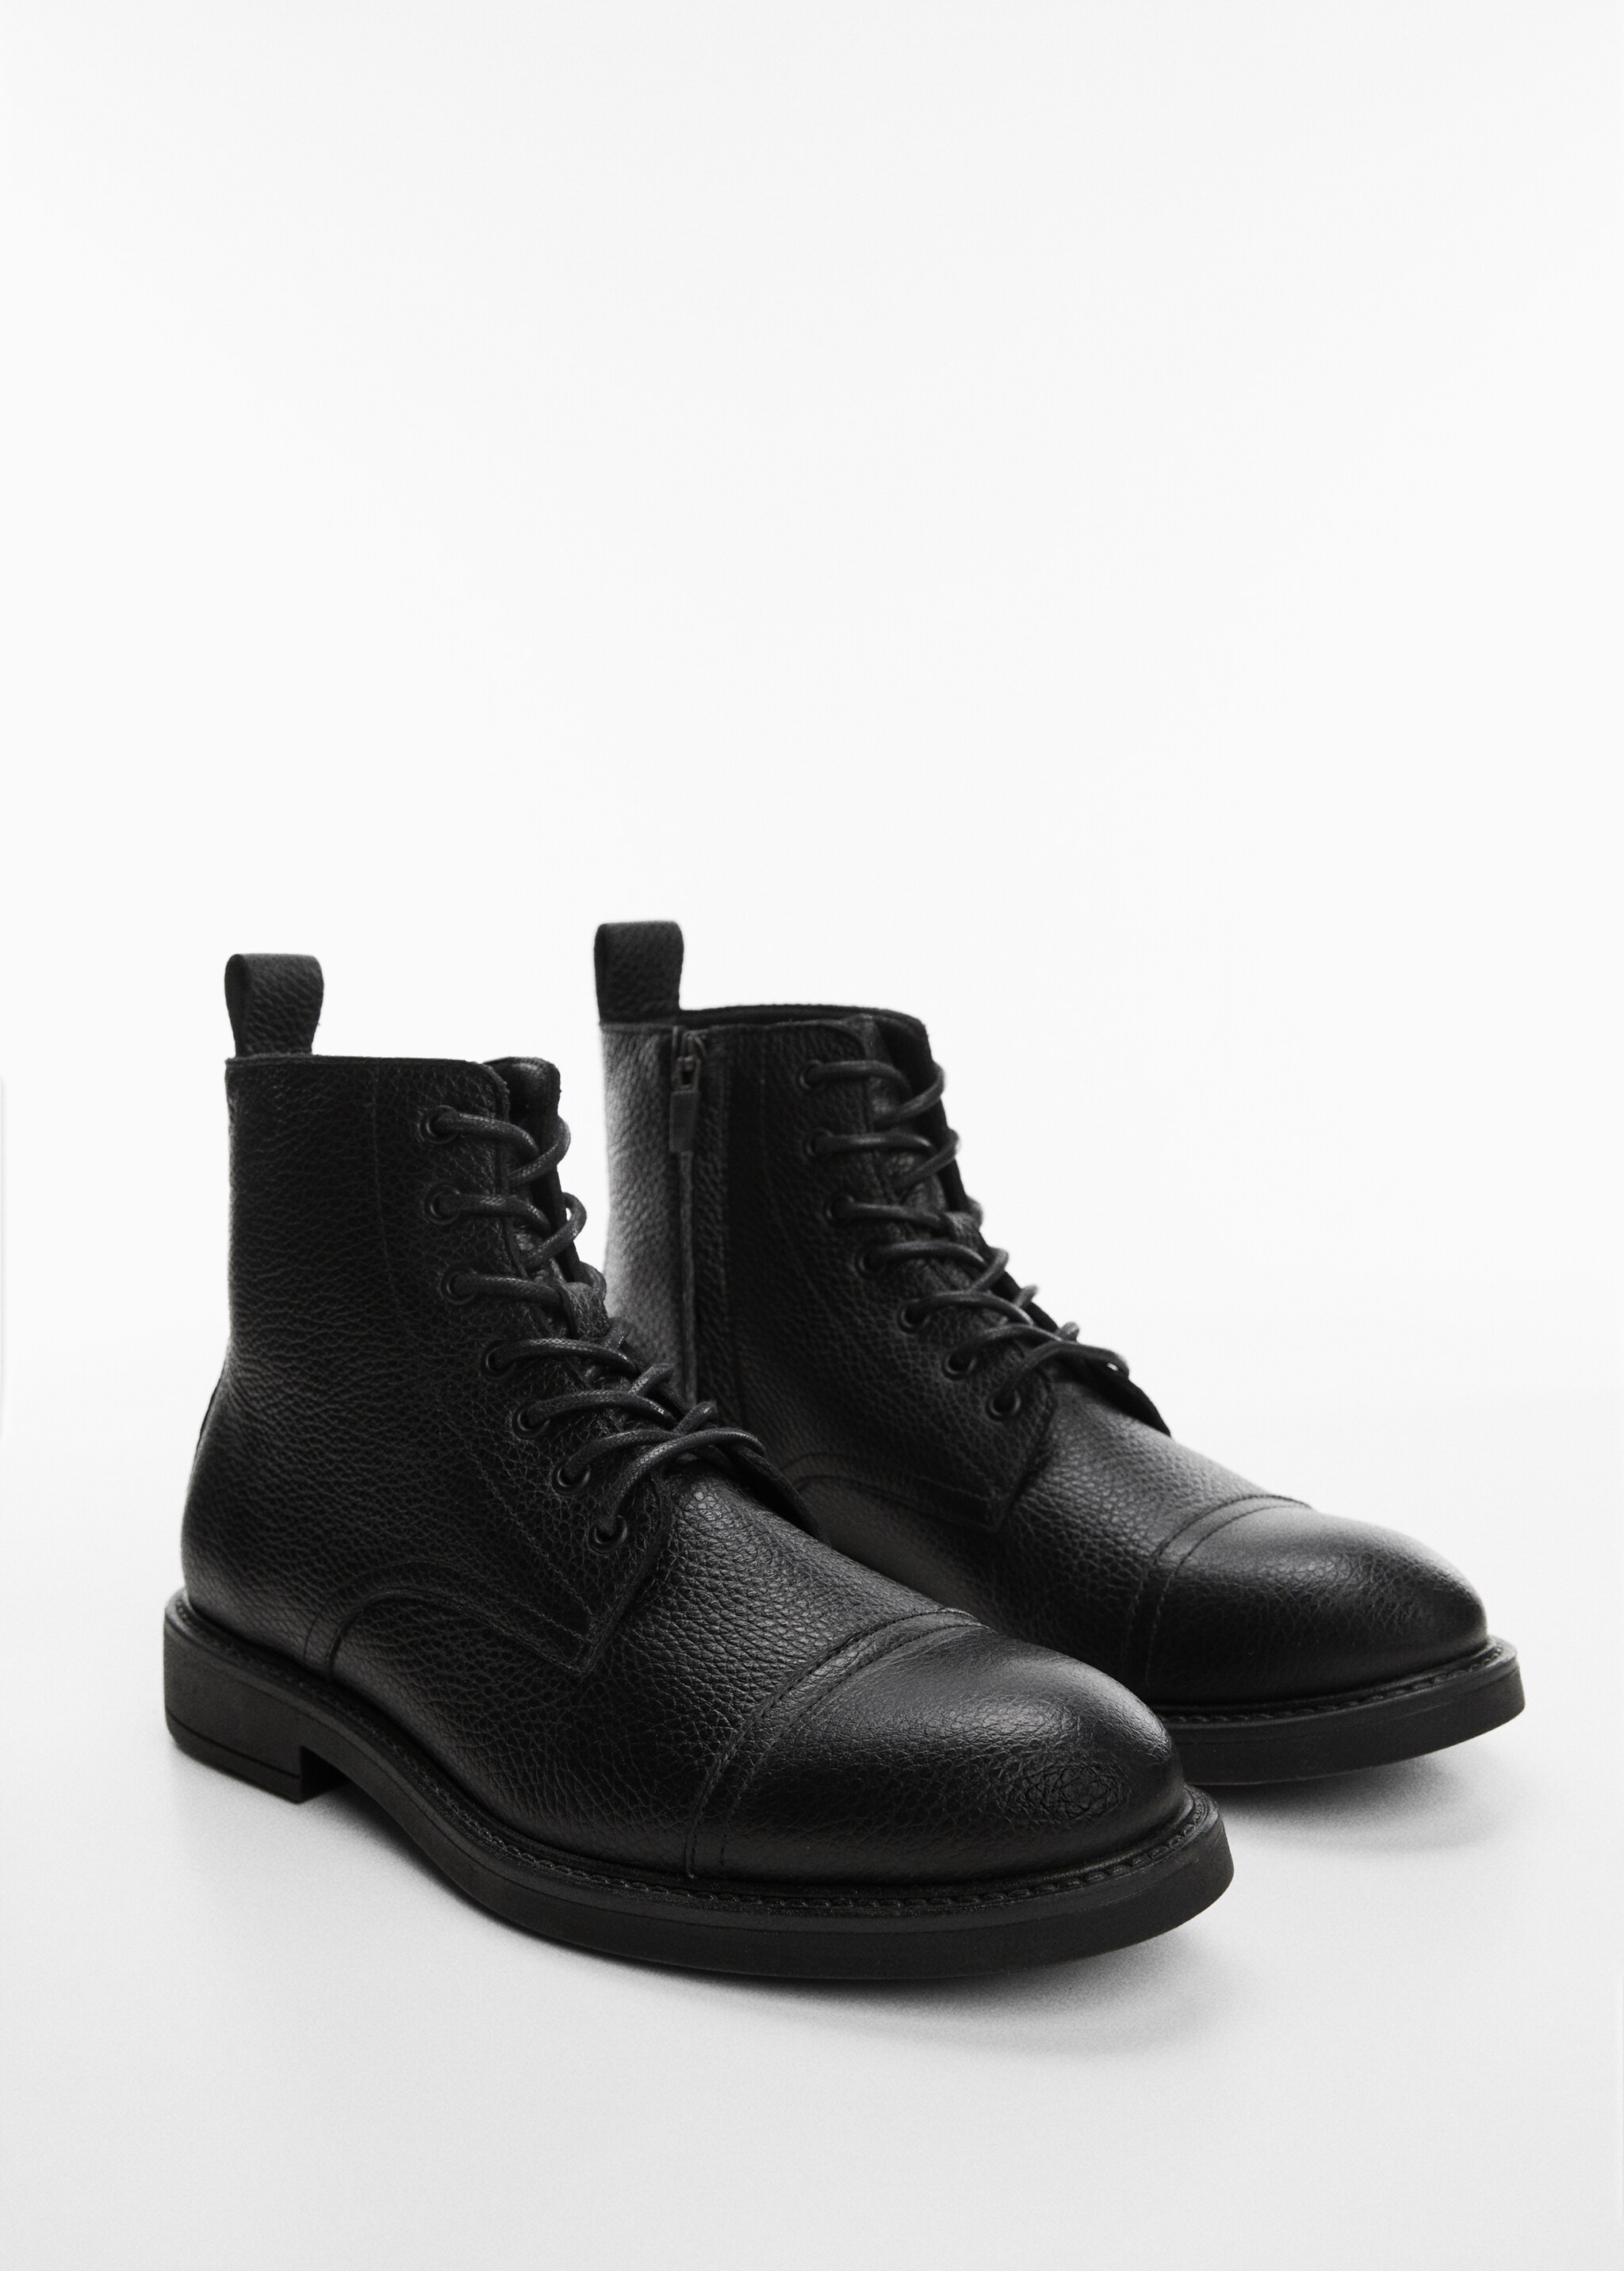 Lace-up leather boots - Medium plane